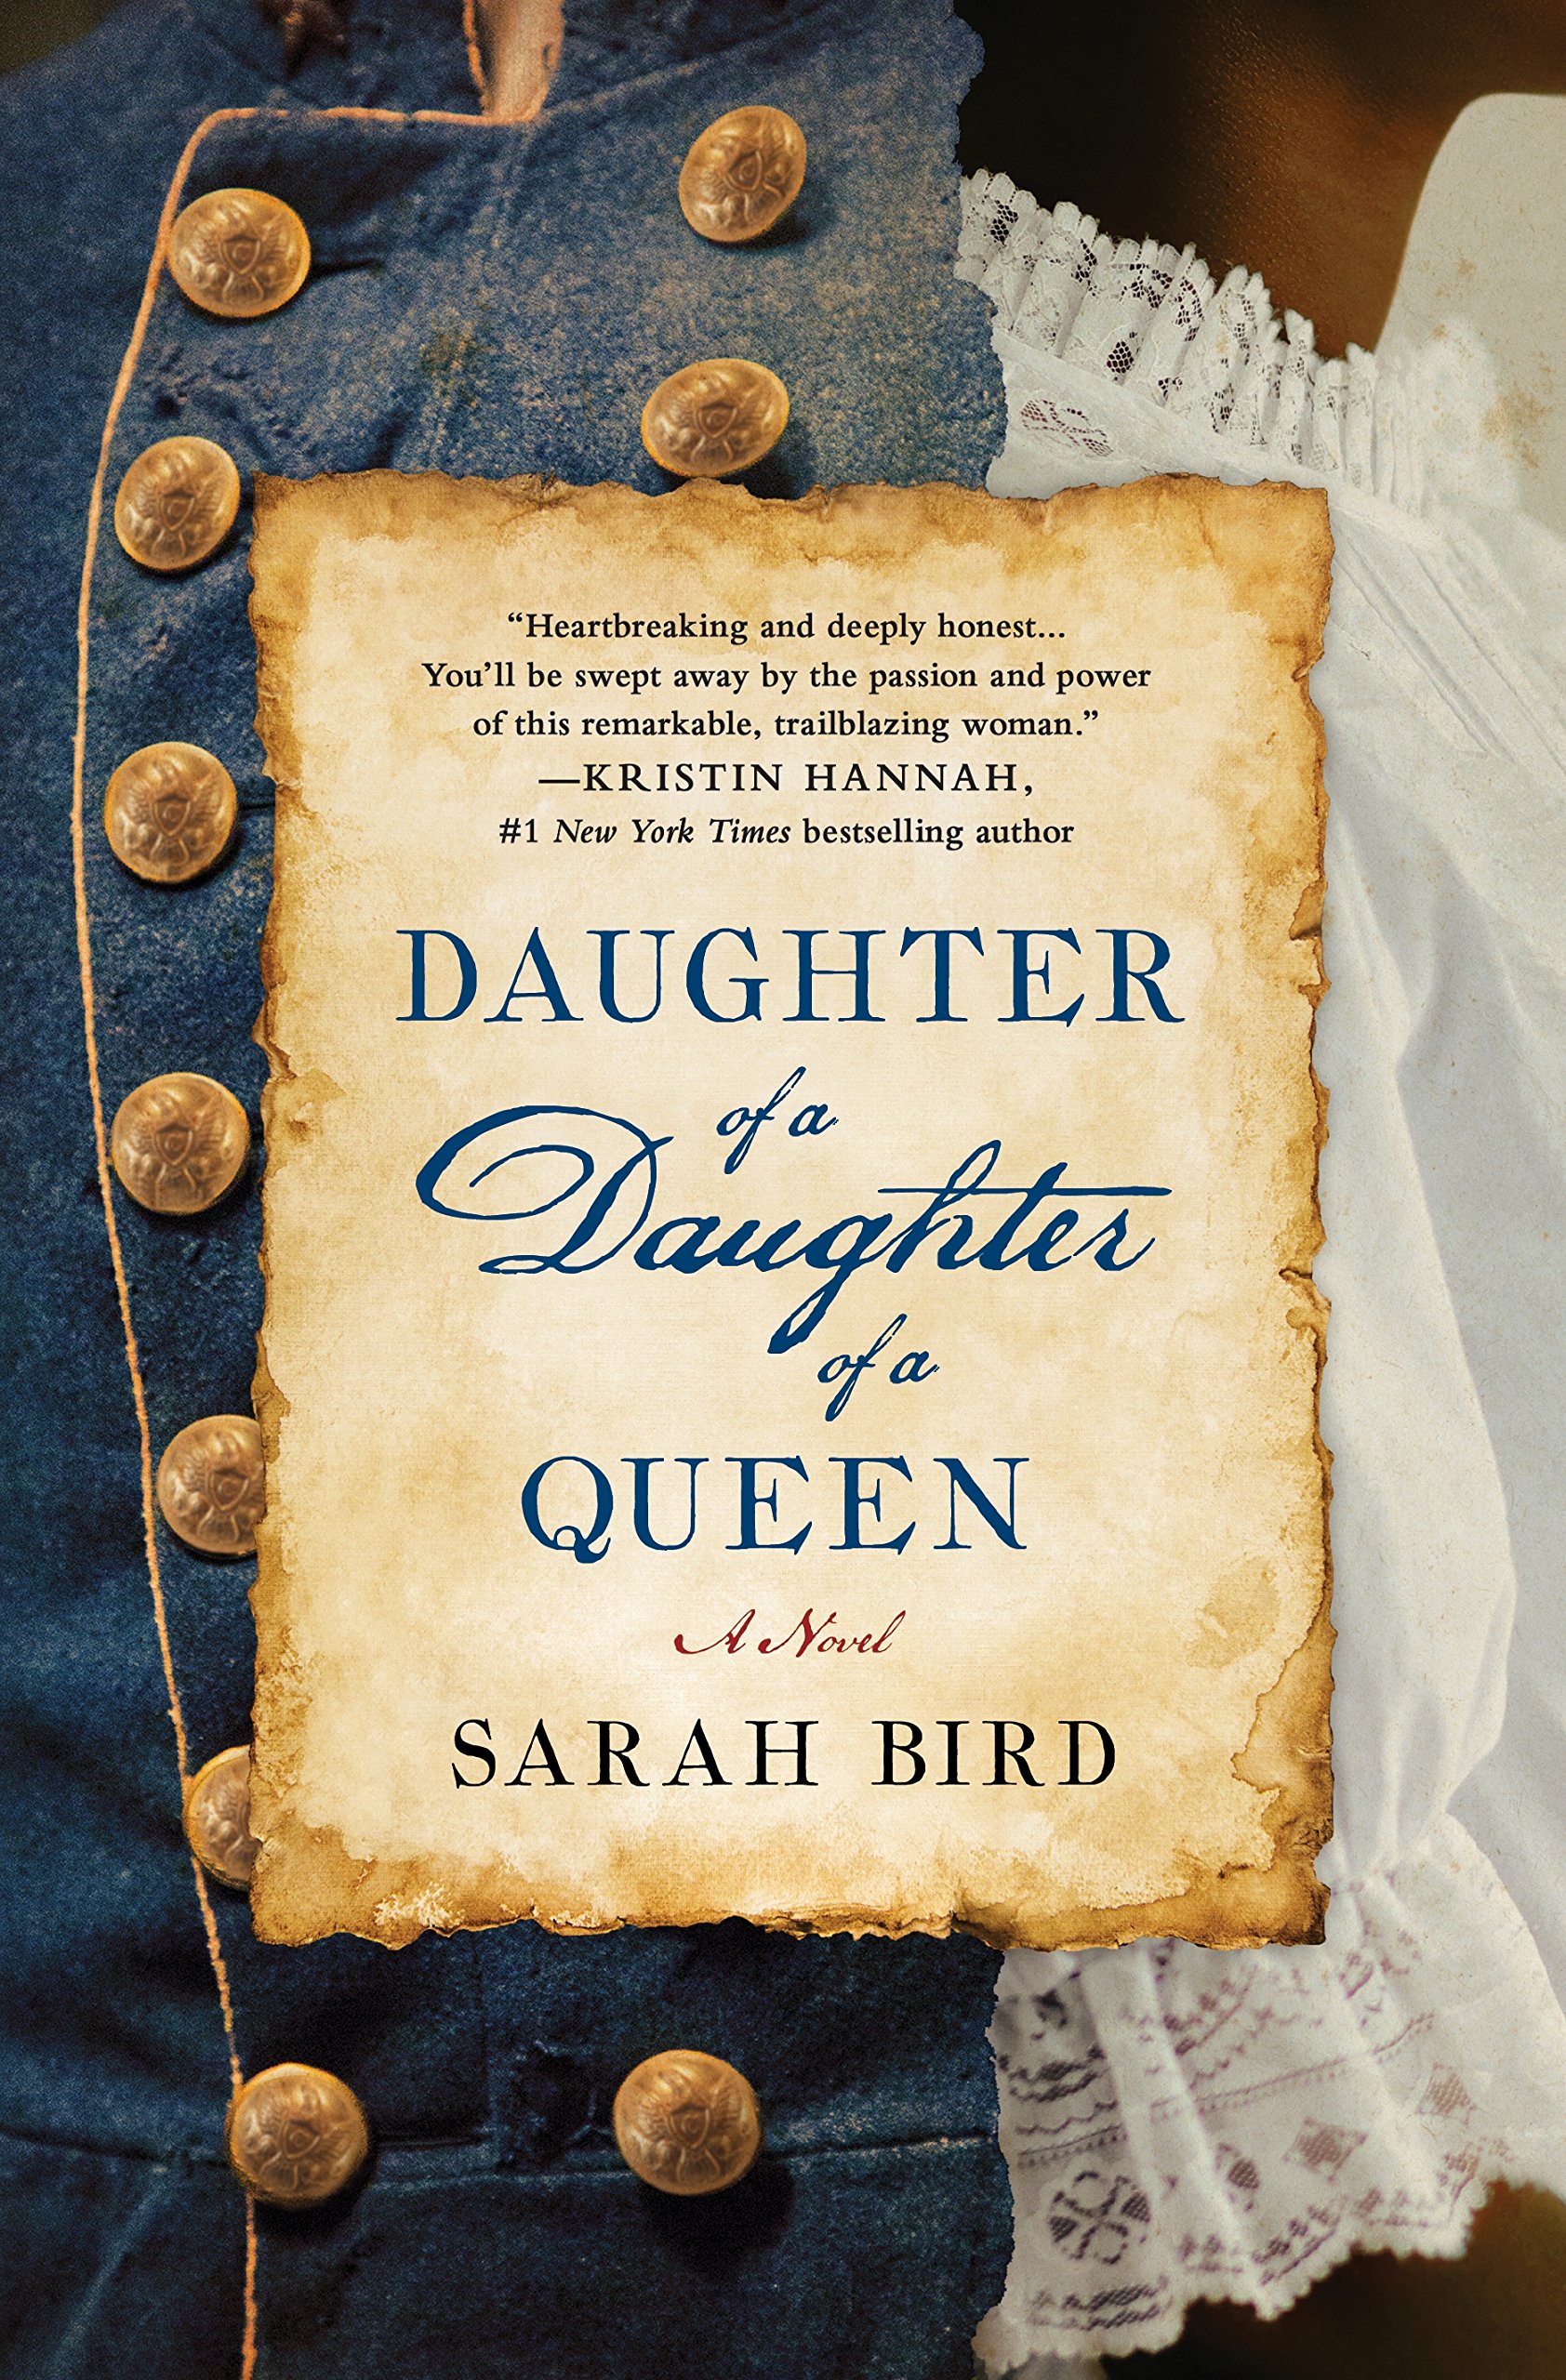 Image for "Daughter of a Daughter of a Queen"